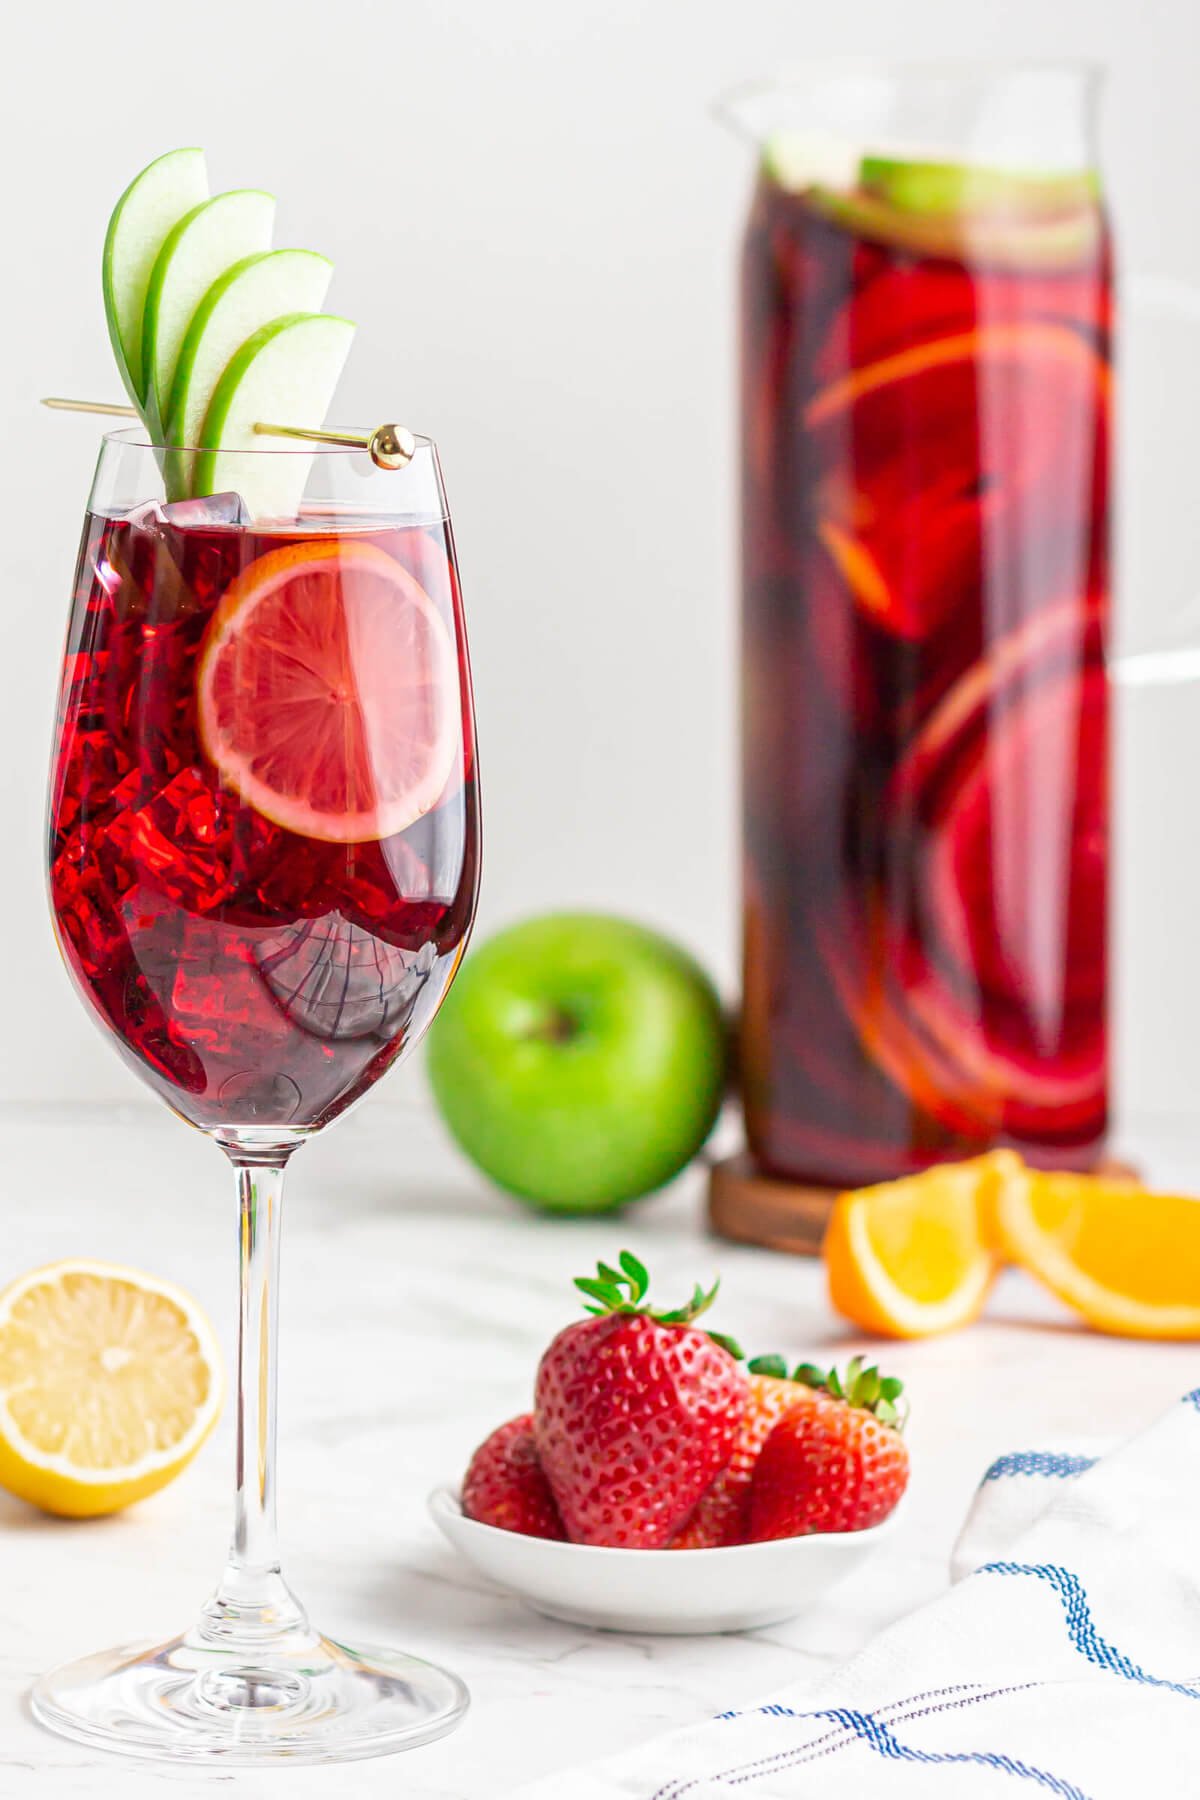 wine glass filled with non-alcoholic Sangria garnished with a green apple fan with a jug of Sangria in the background.